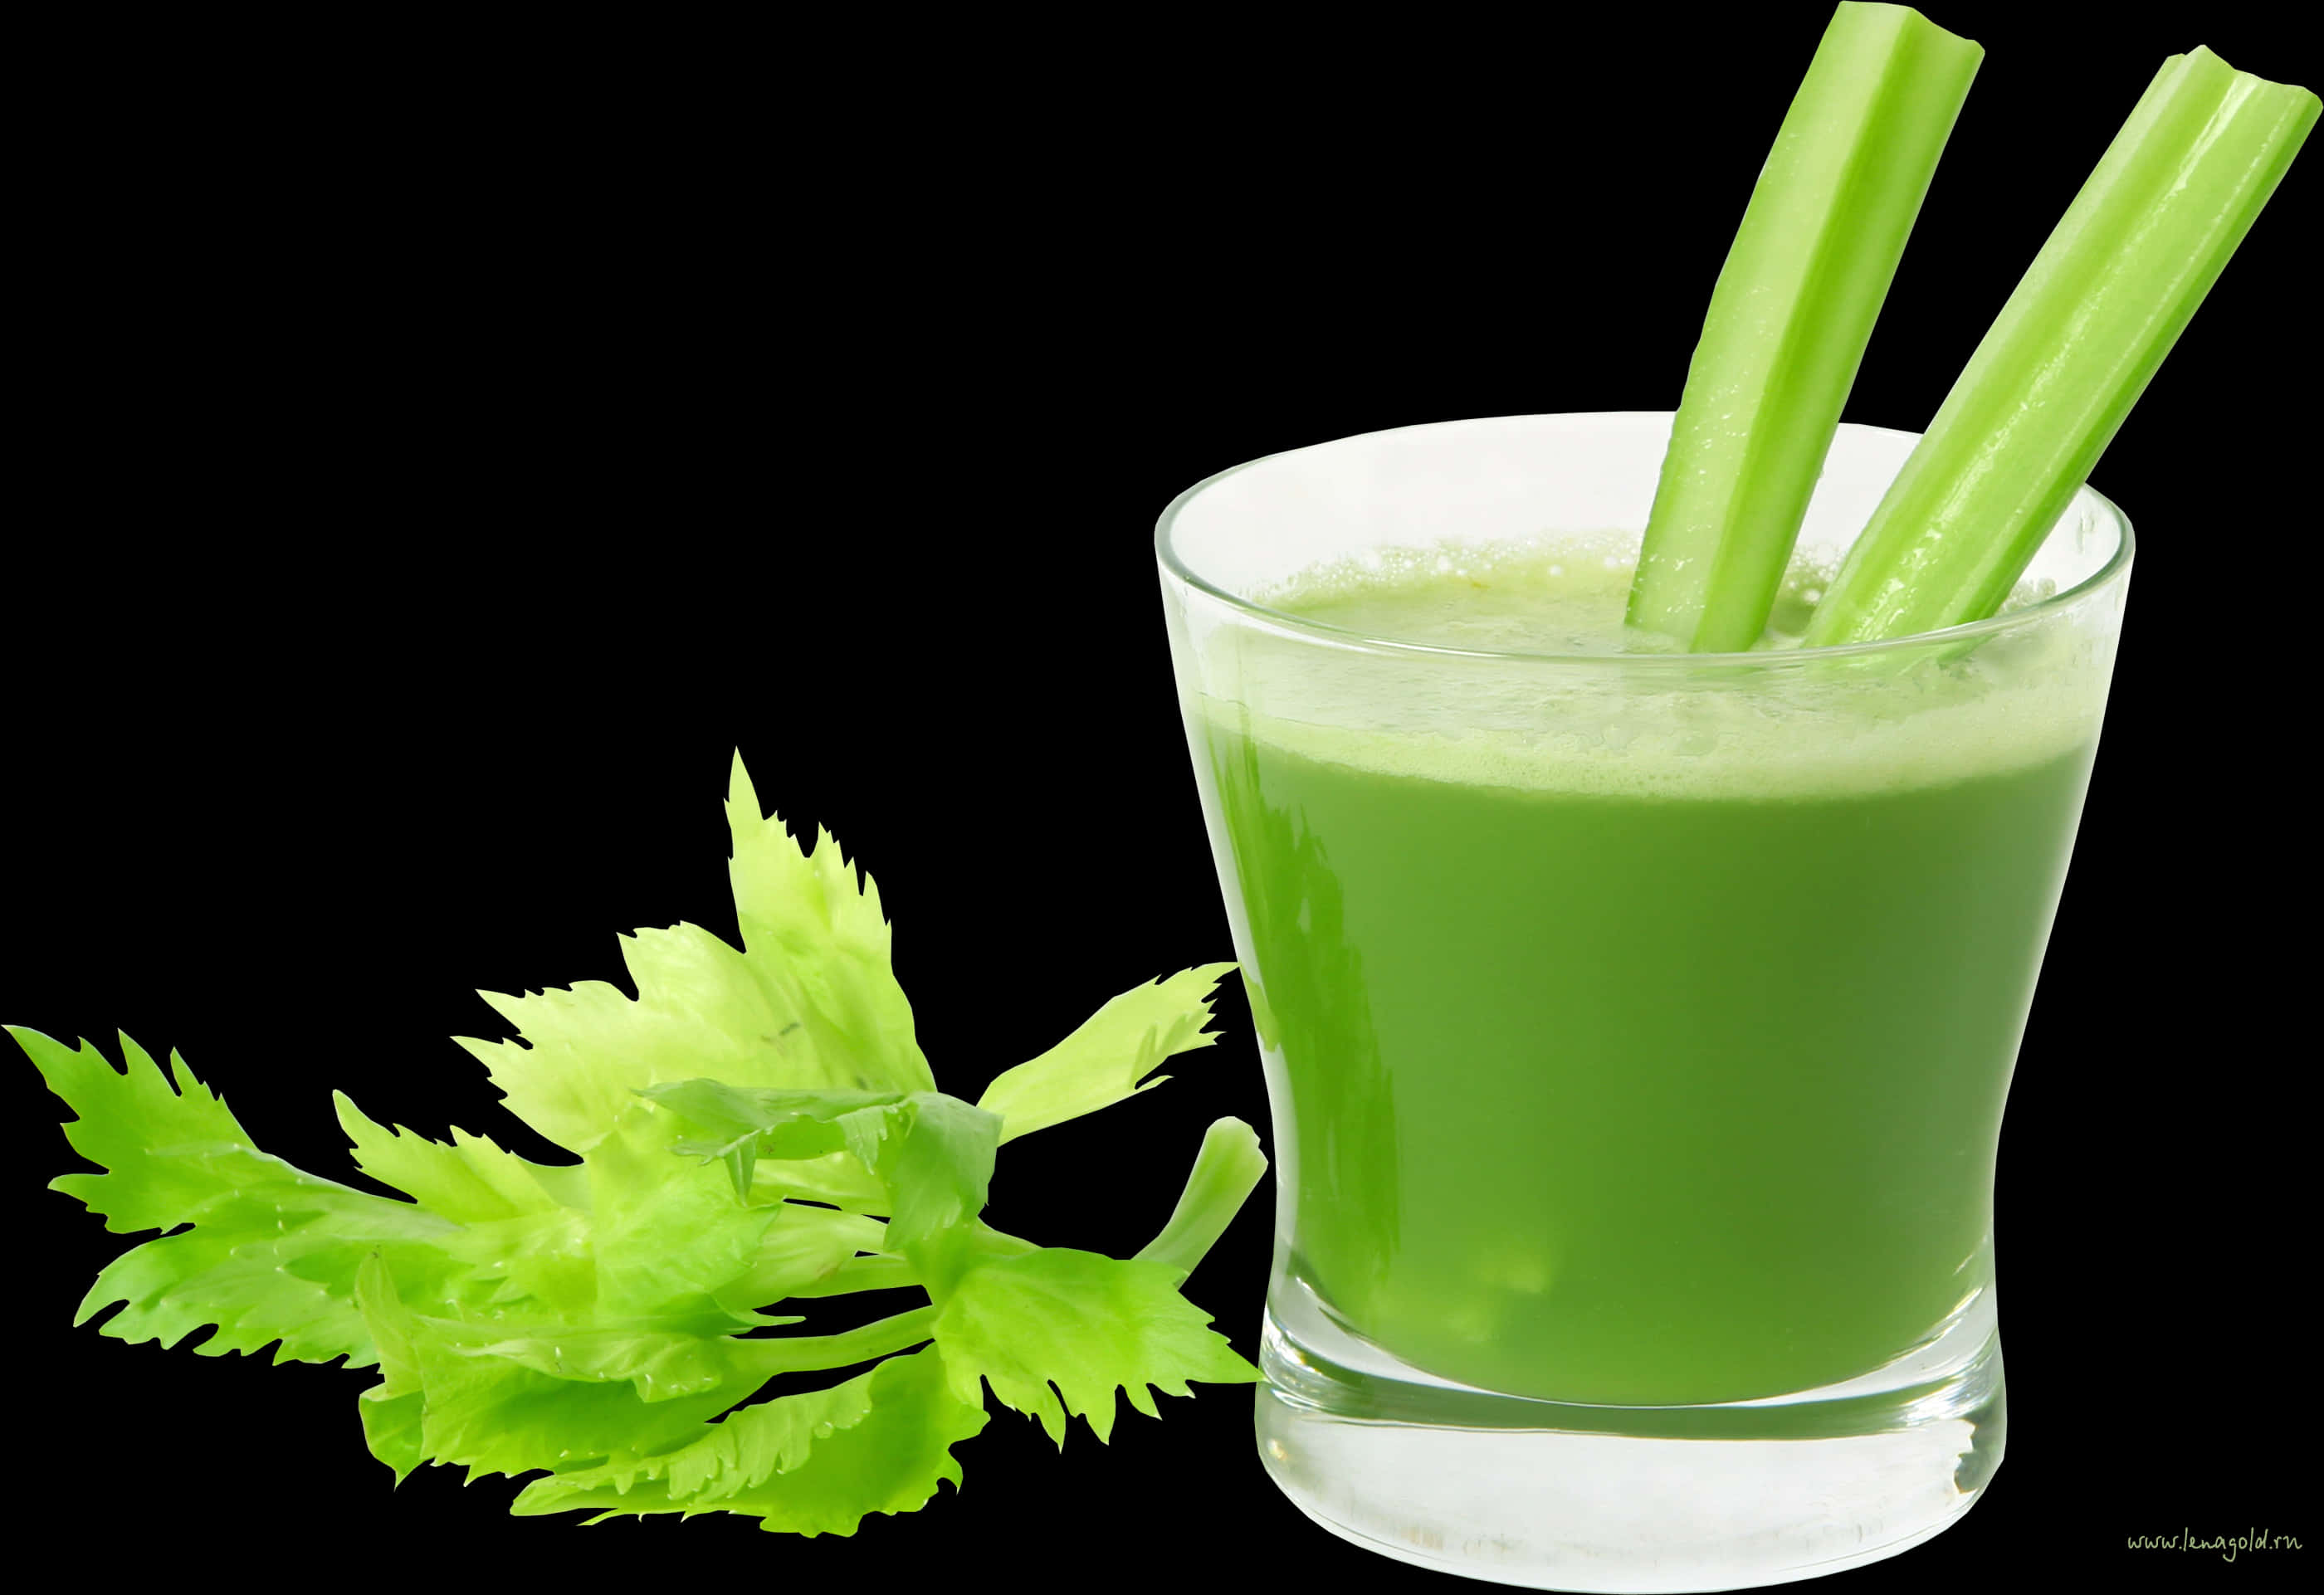 A Glass Of Celery Juice And Celery Leaves